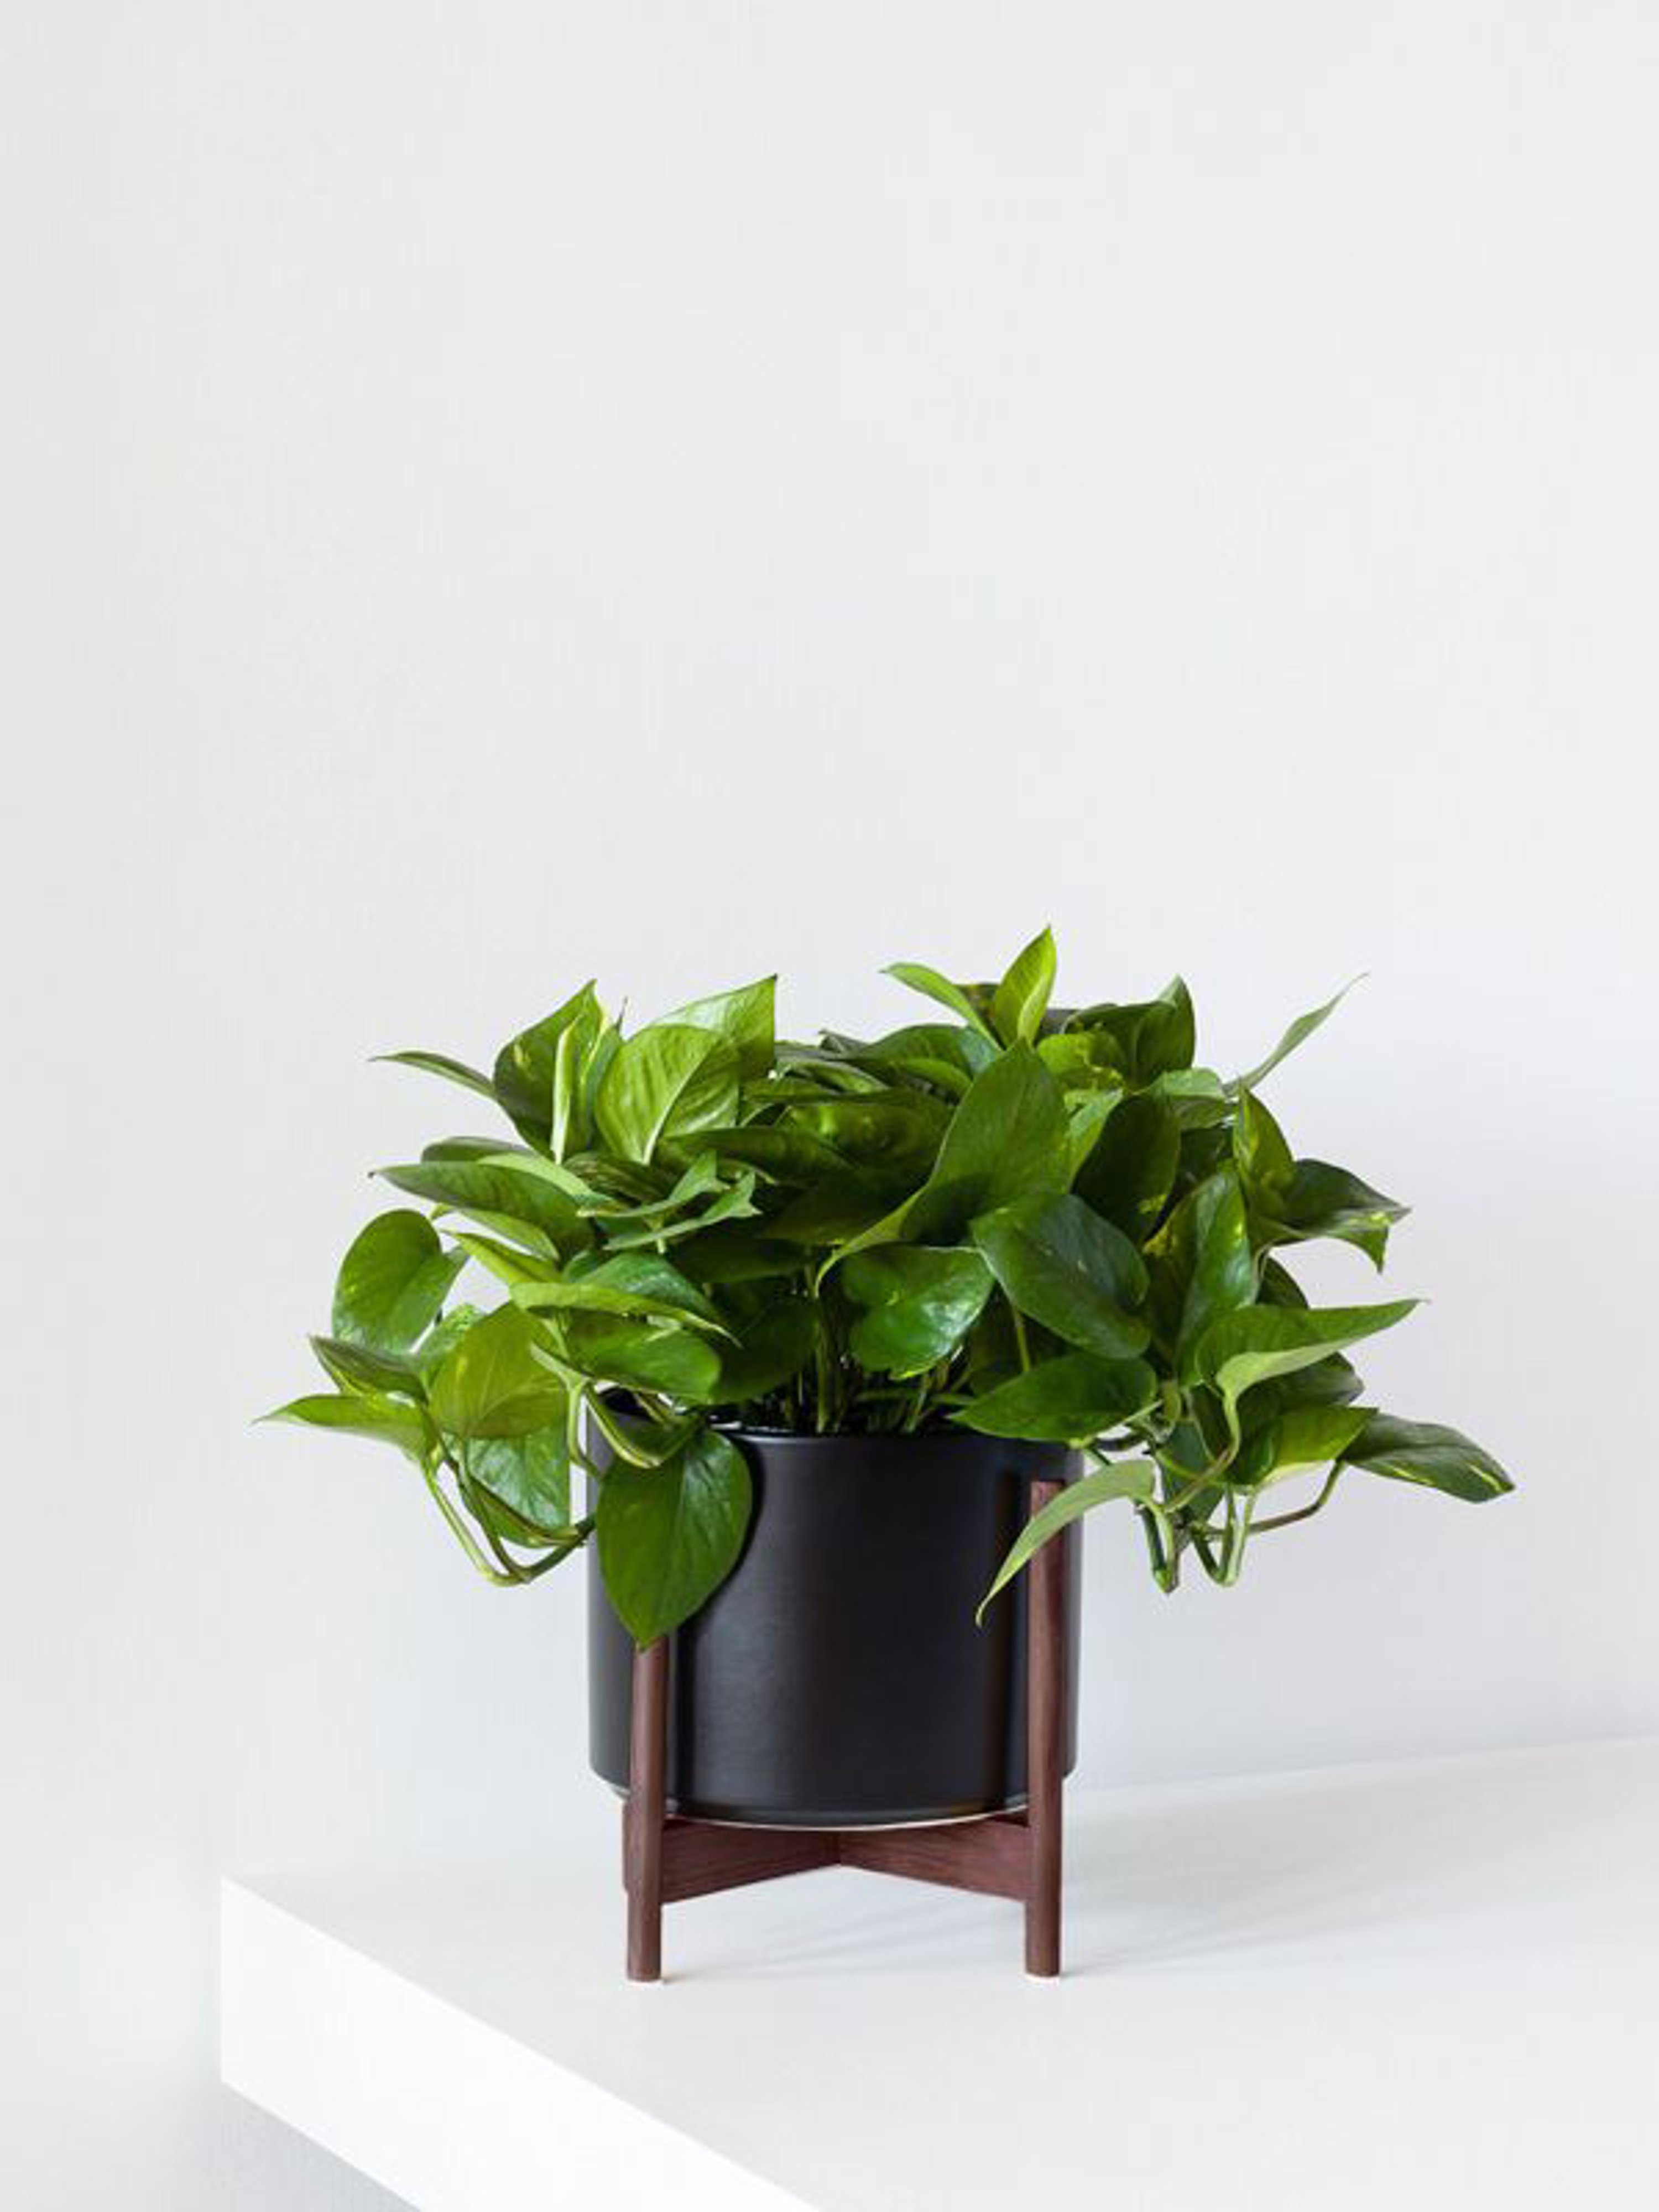 Leon & George Medium Cascading Pothos With Mid-century Ceramic Pot In Black With Wood Stand